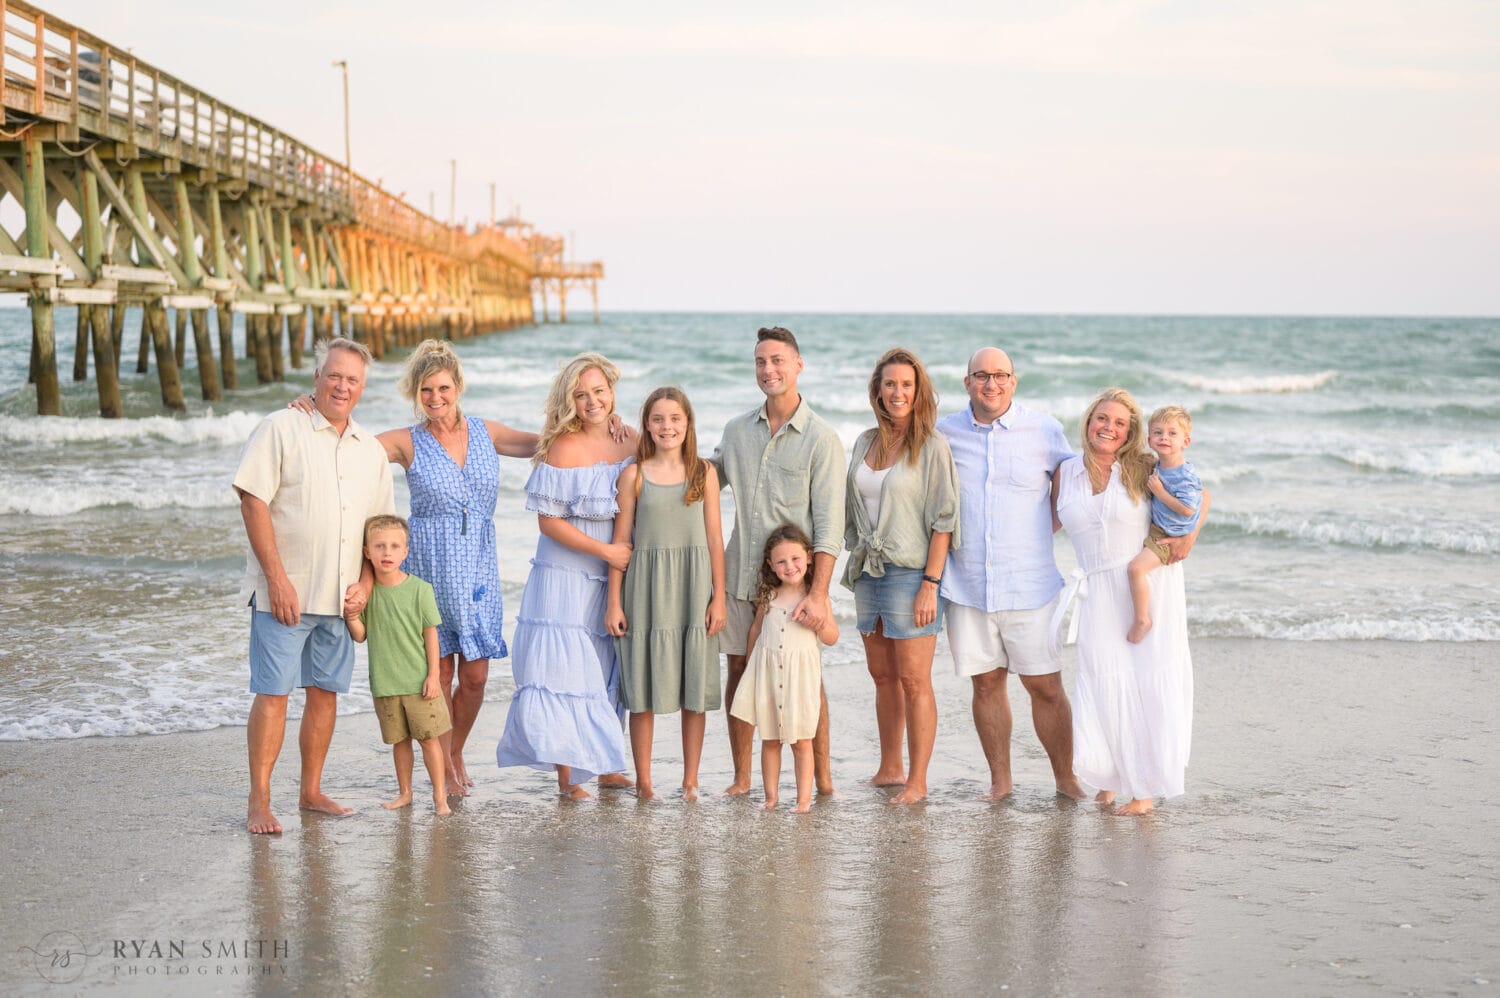 Large family by the pier - Cherry Grove Pier